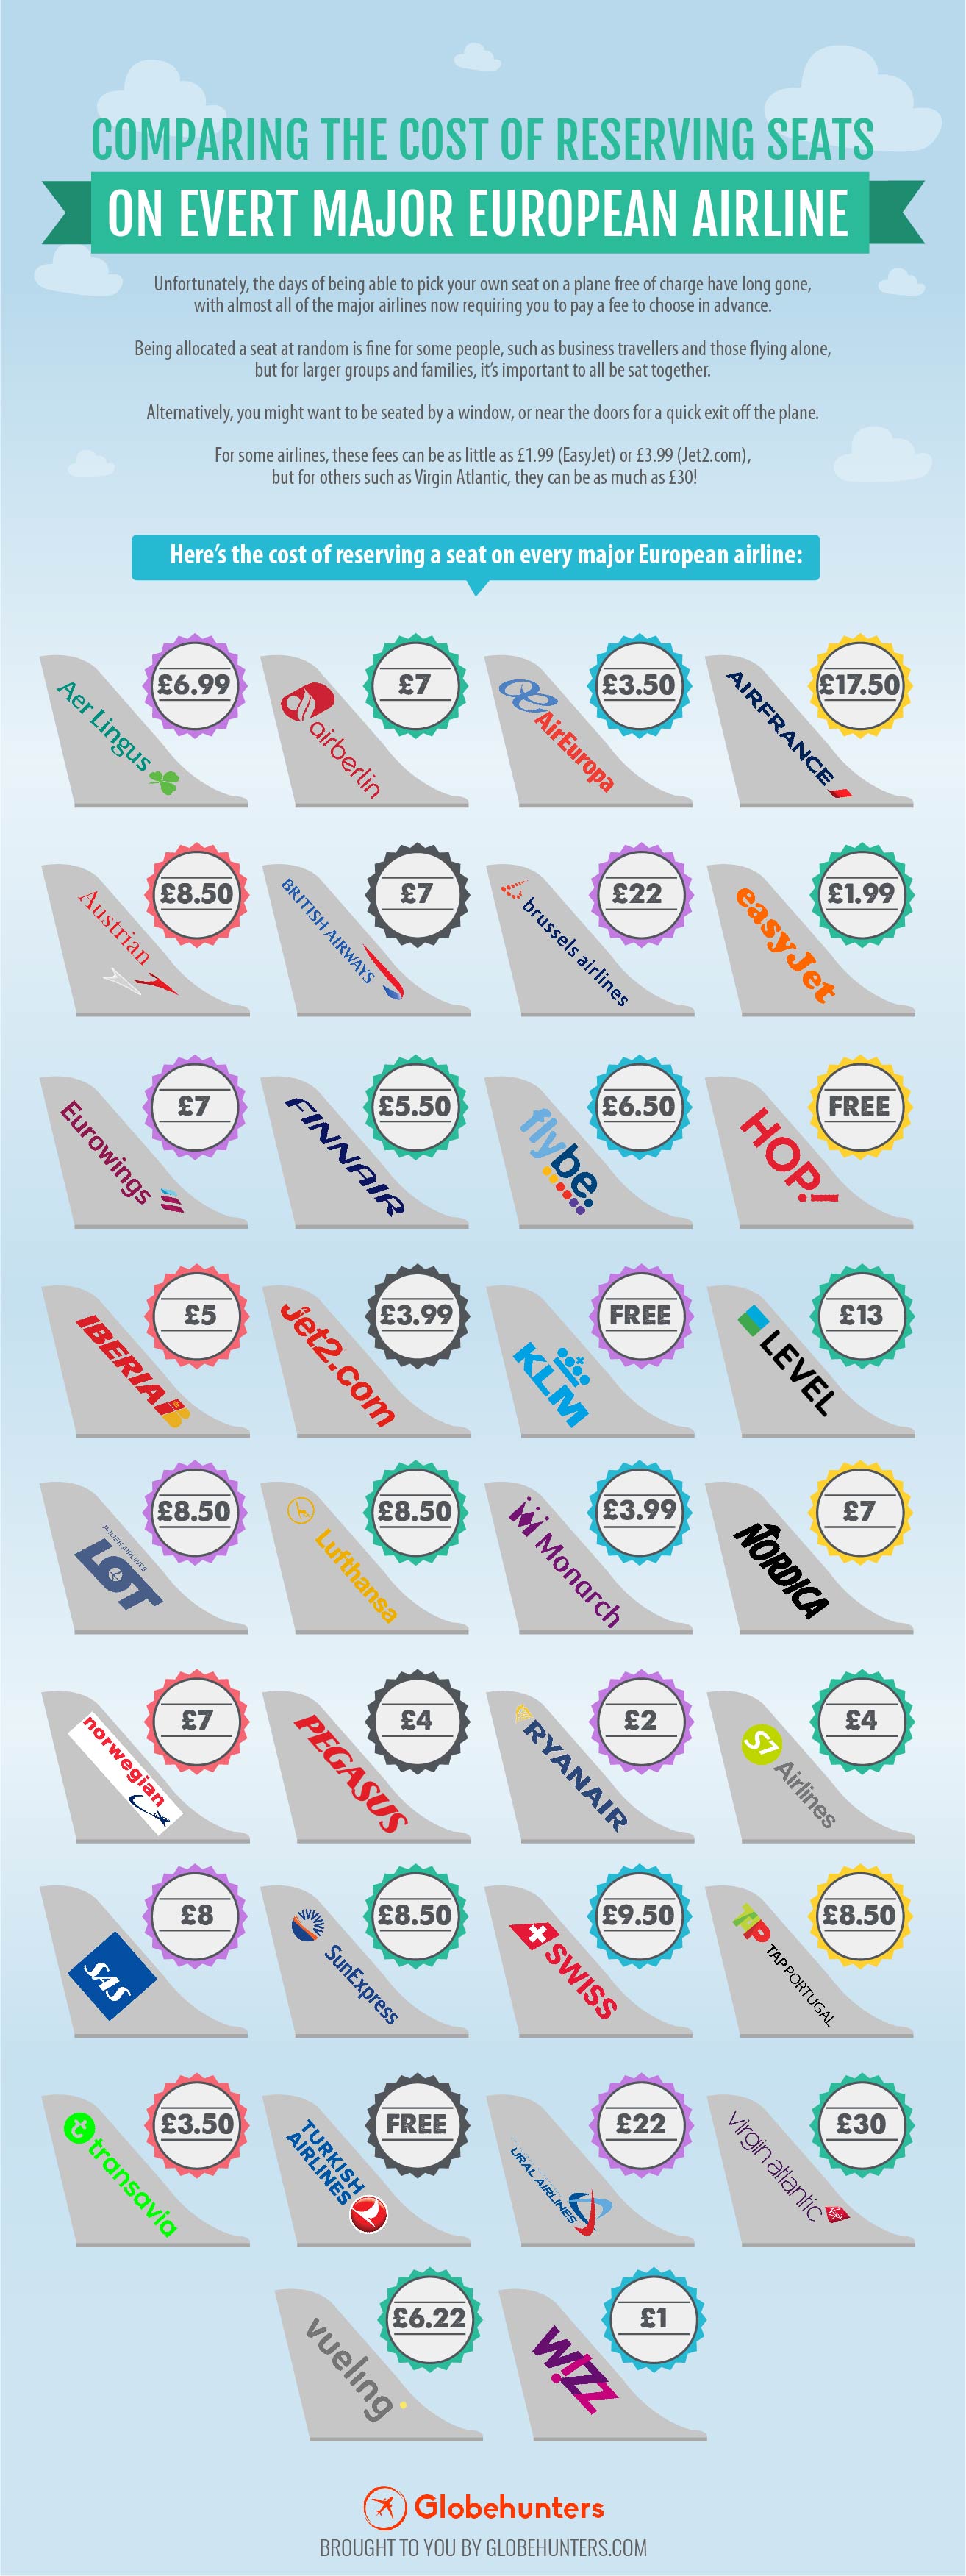 Comparing The Cost Of Reserving Seats On Every Major European Airline